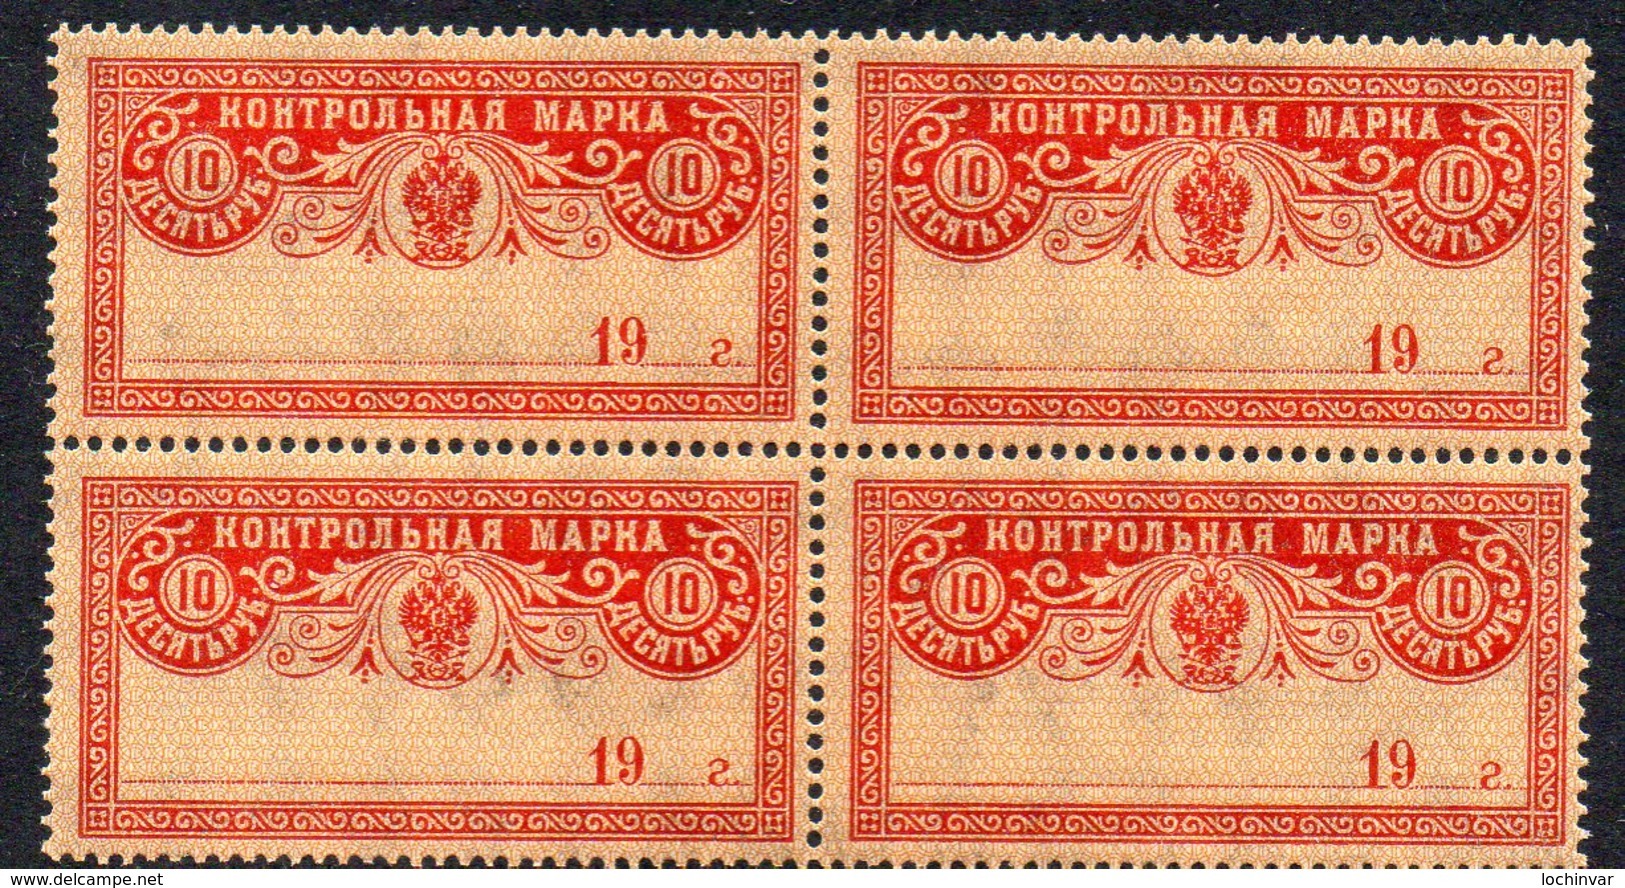 RUSSIA, 1918 10R SAVINGS STAMPS BLOCK 4 MNH - Unused Stamps